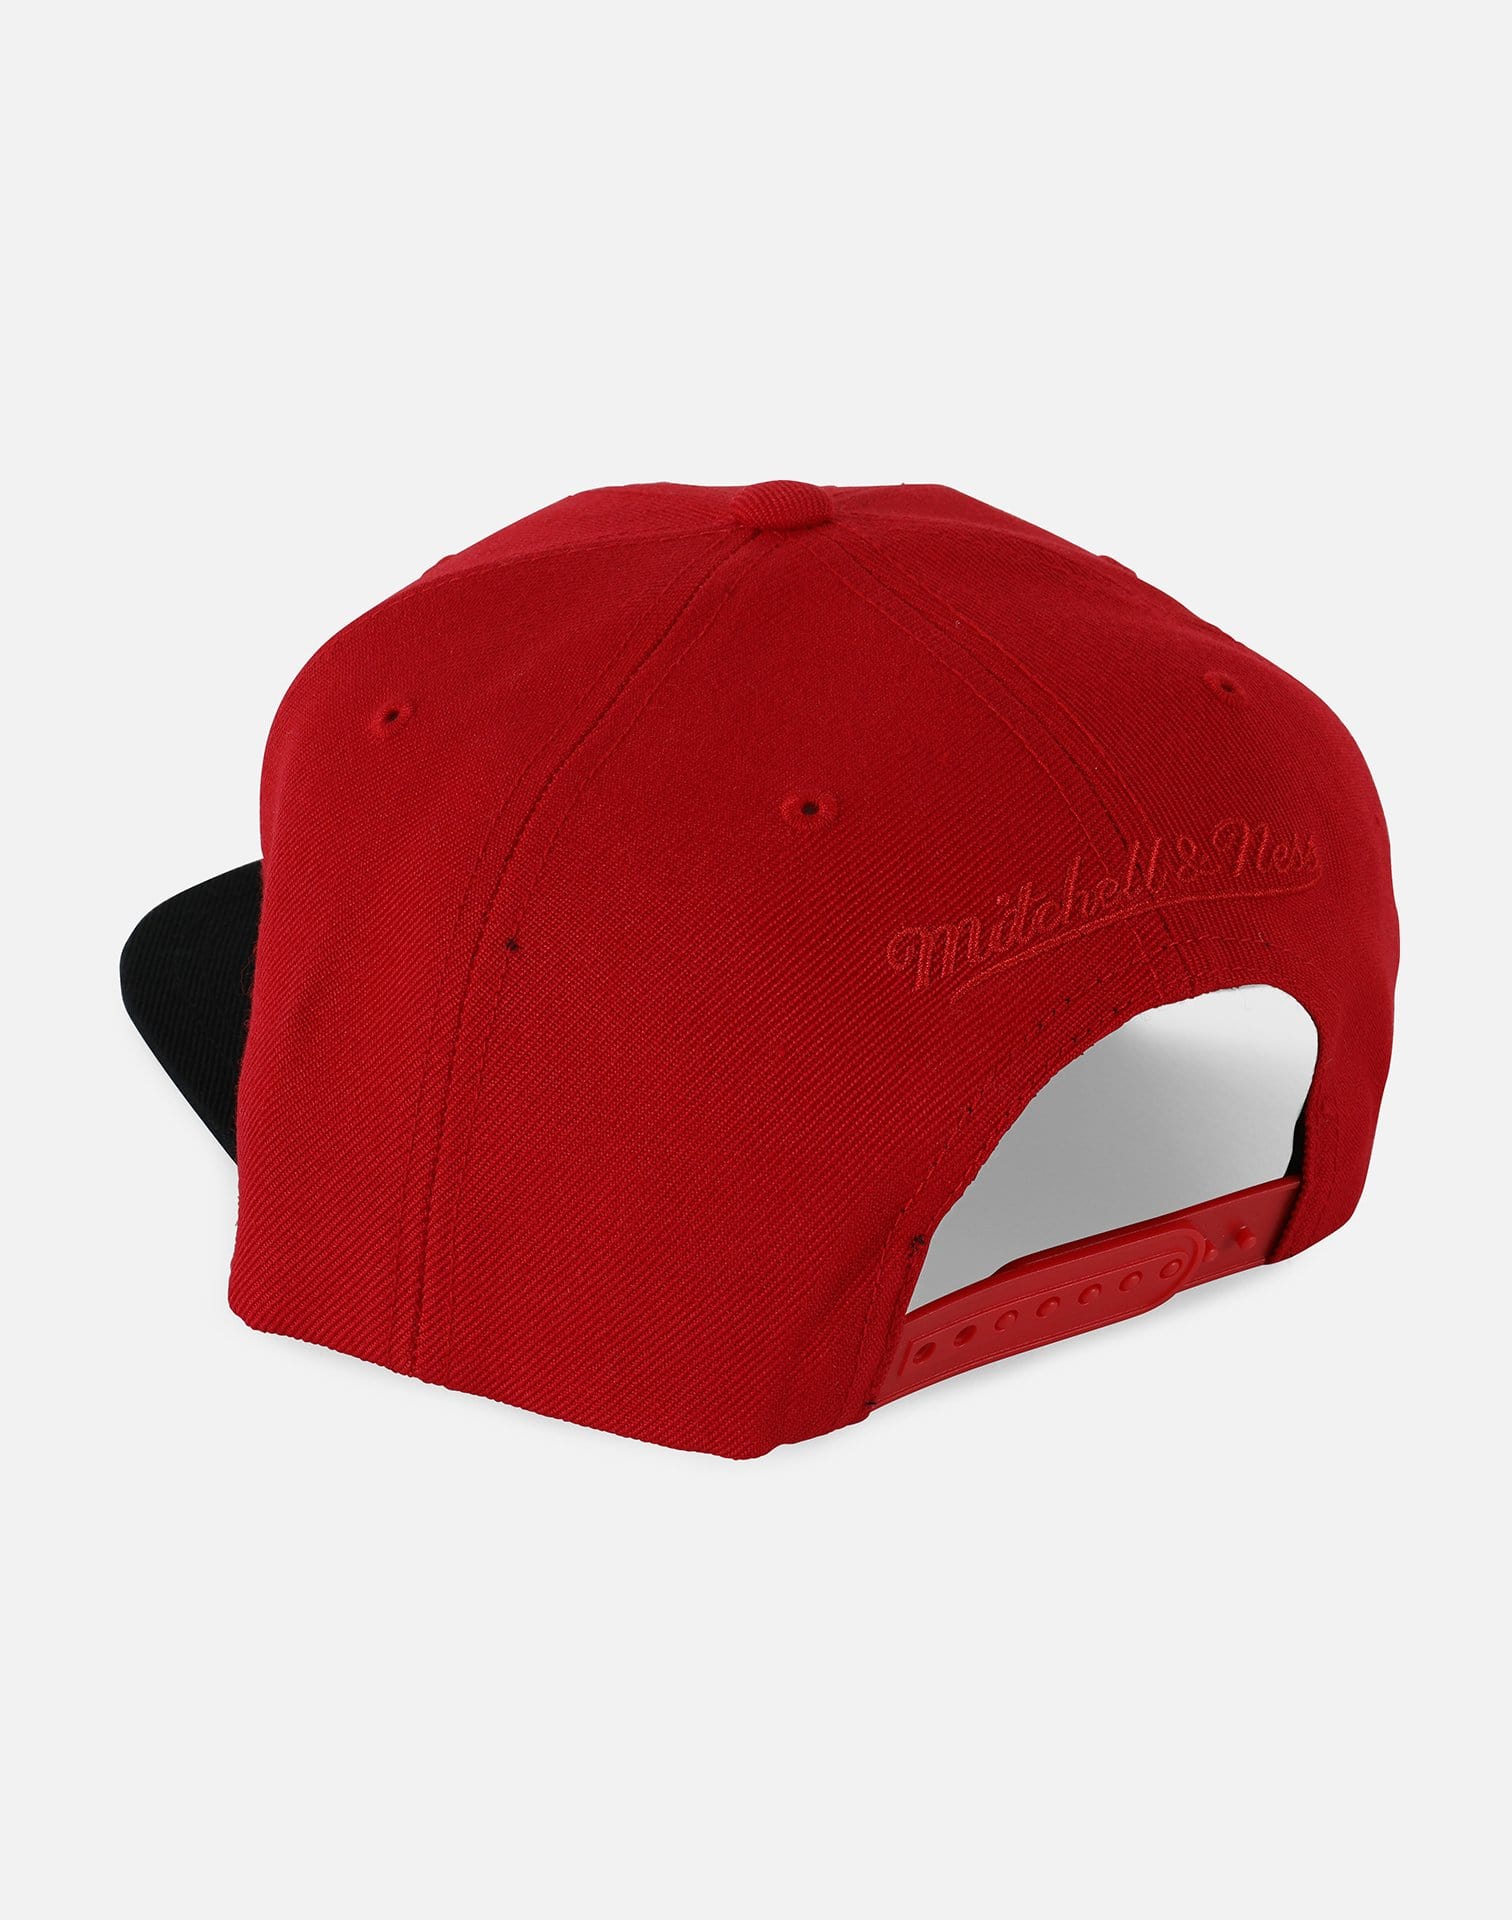 Mitchell and Ness Chicago Bulls Side Panel Cropped Snapback